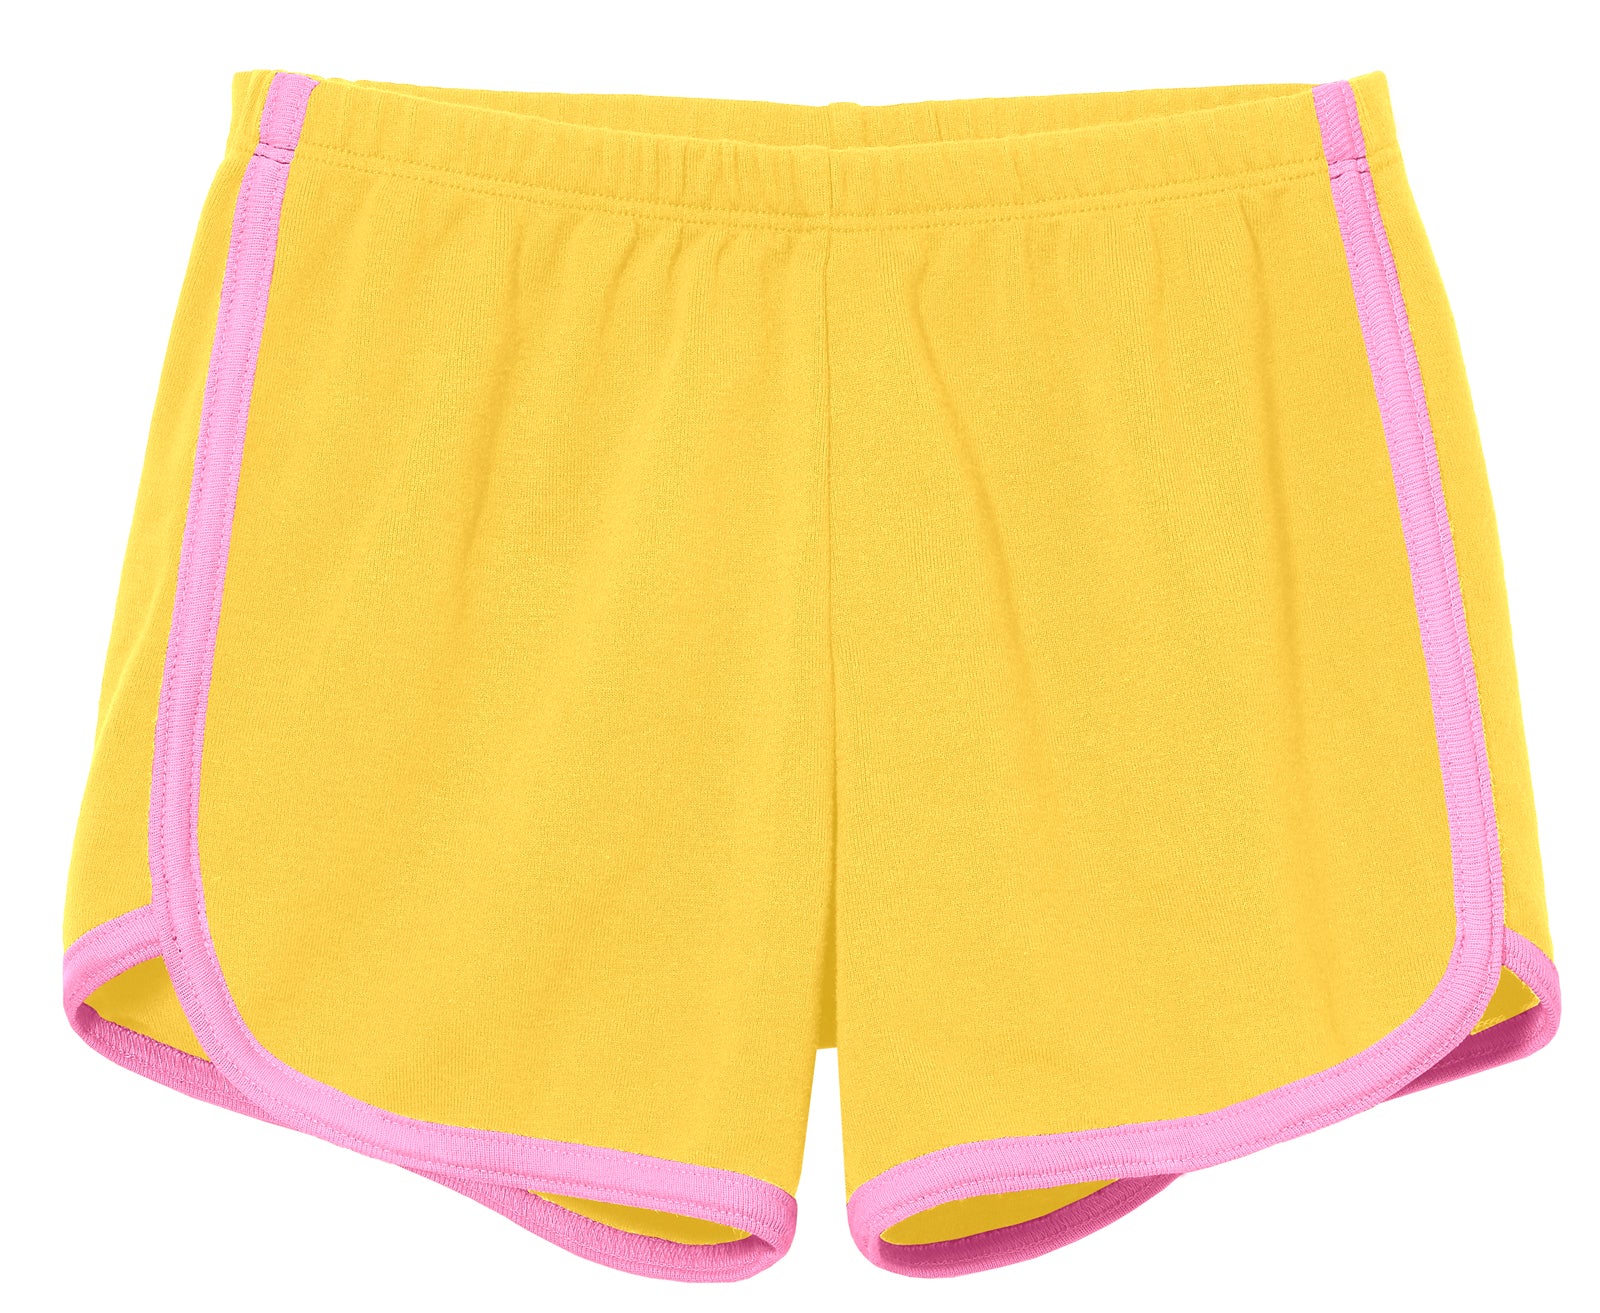 Girls Soft Cotton Knit Short with Trim